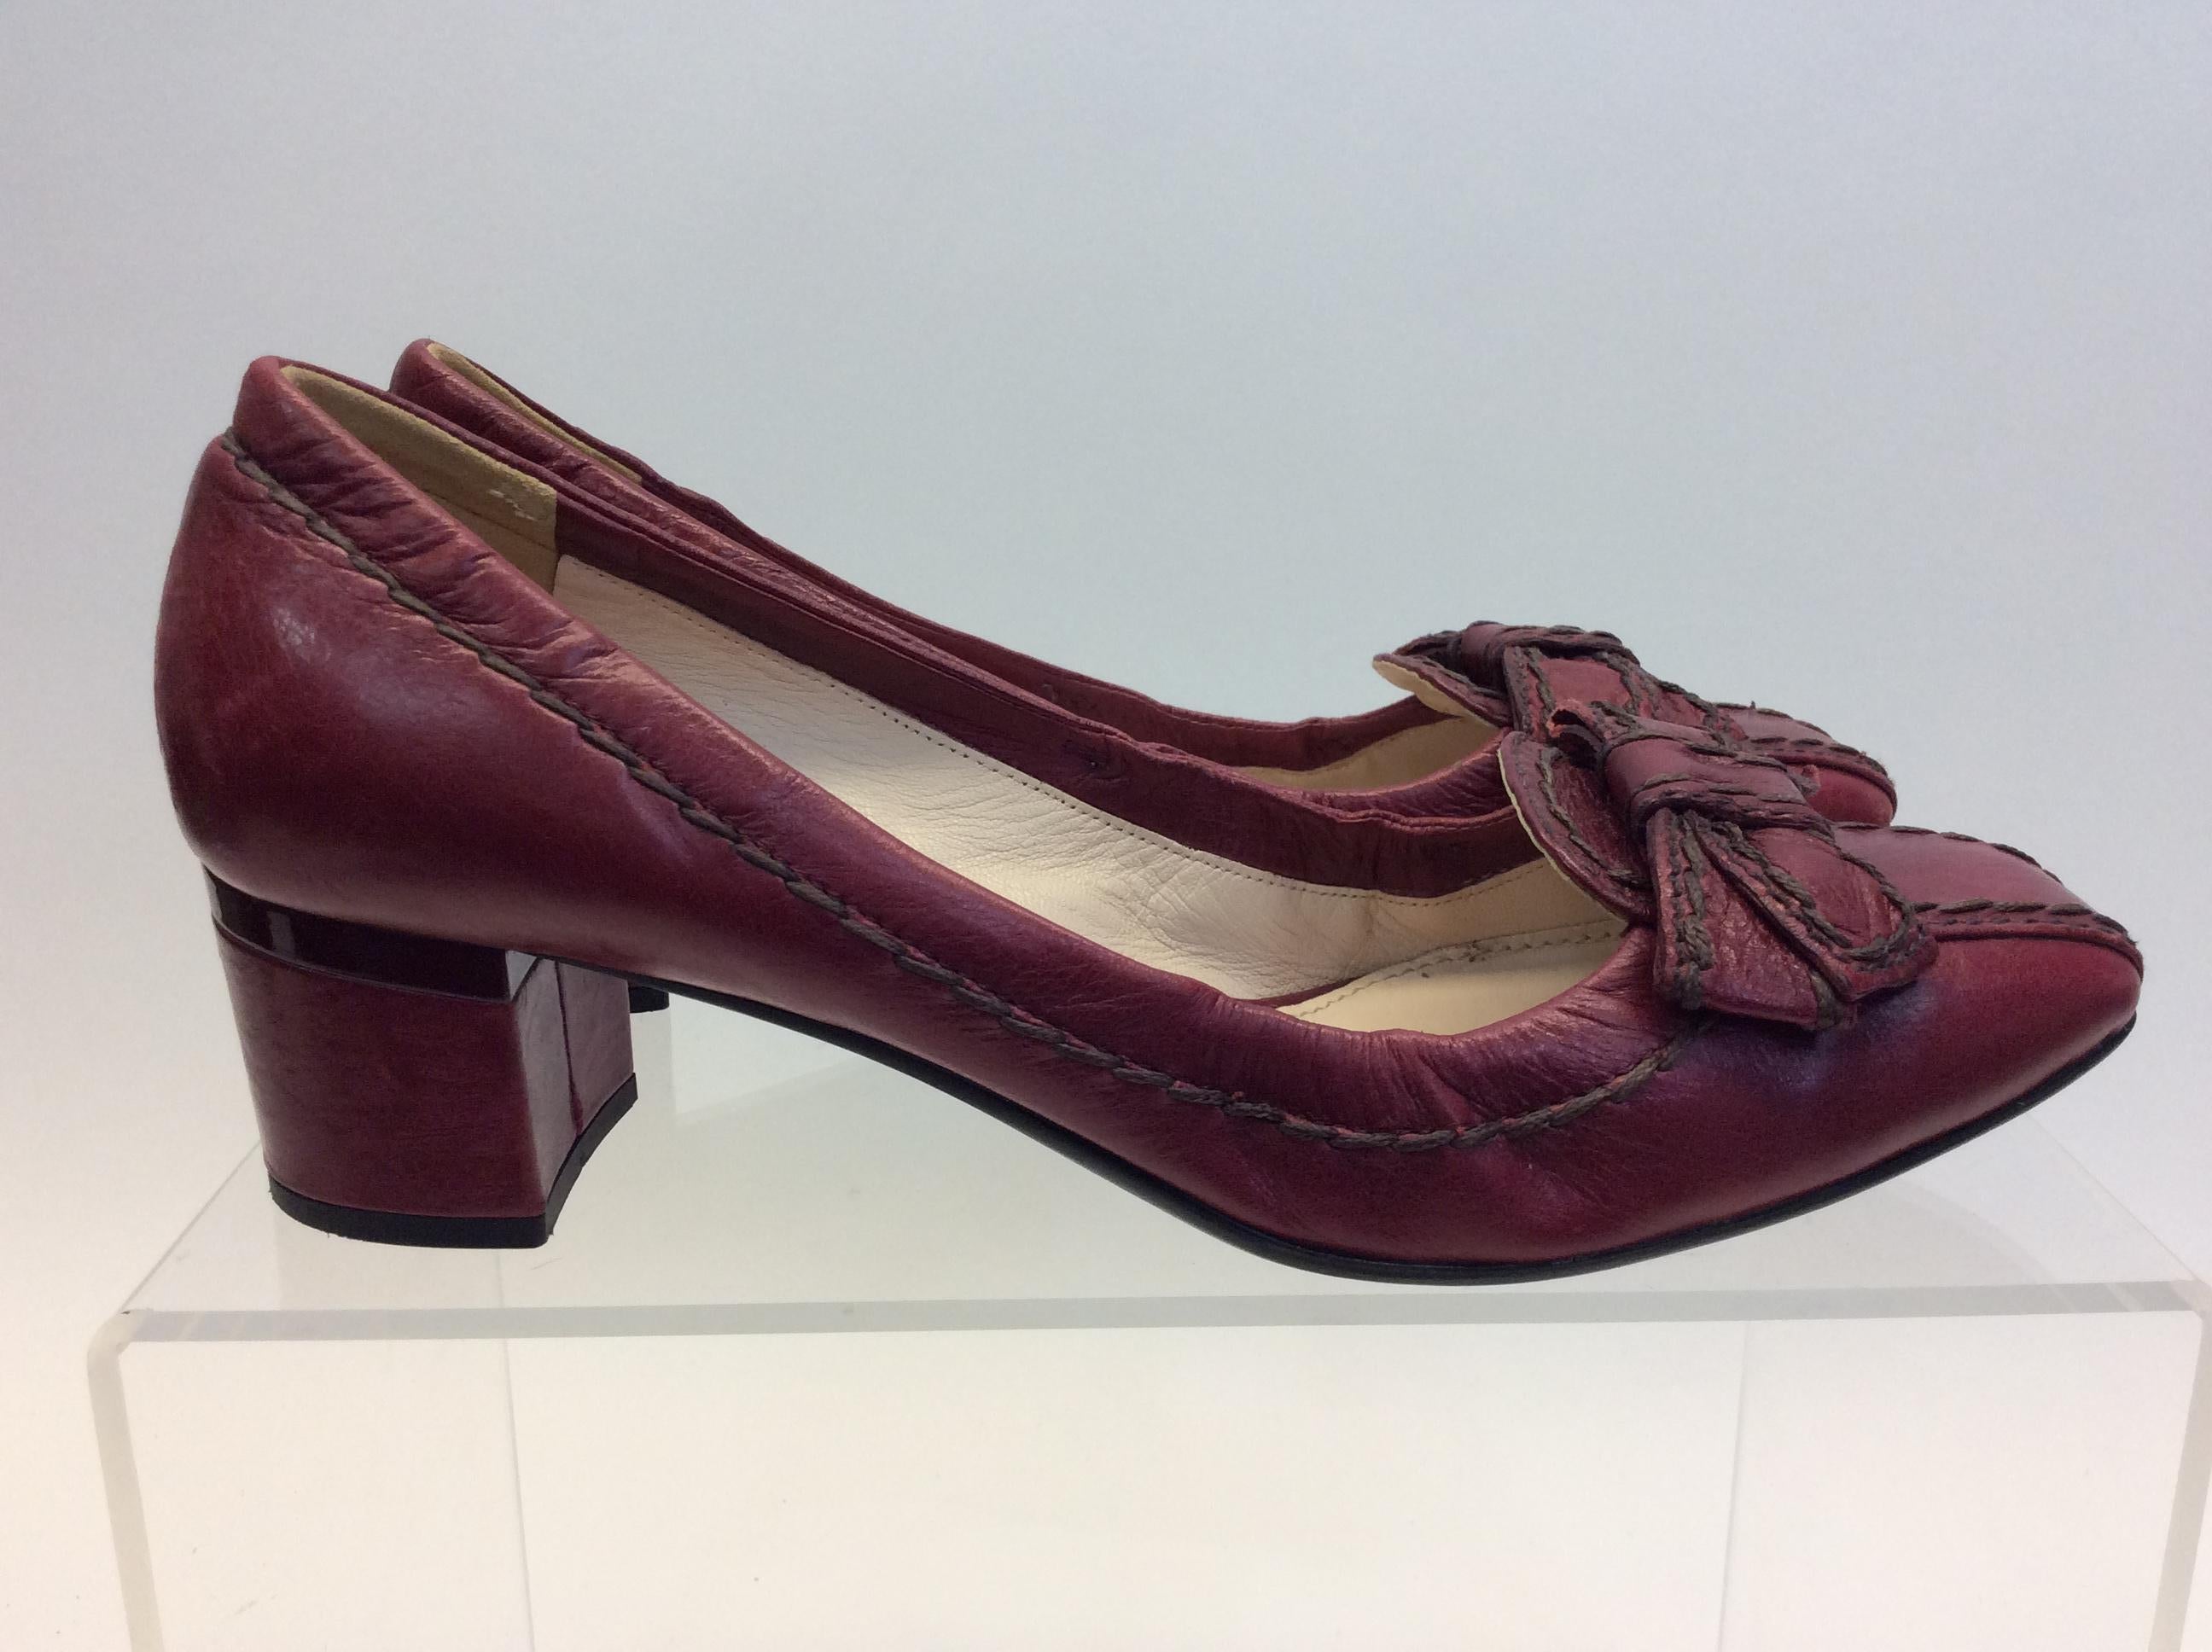 Prada Burgundy Leather Bow Heels In Good Condition For Sale In Narberth, PA